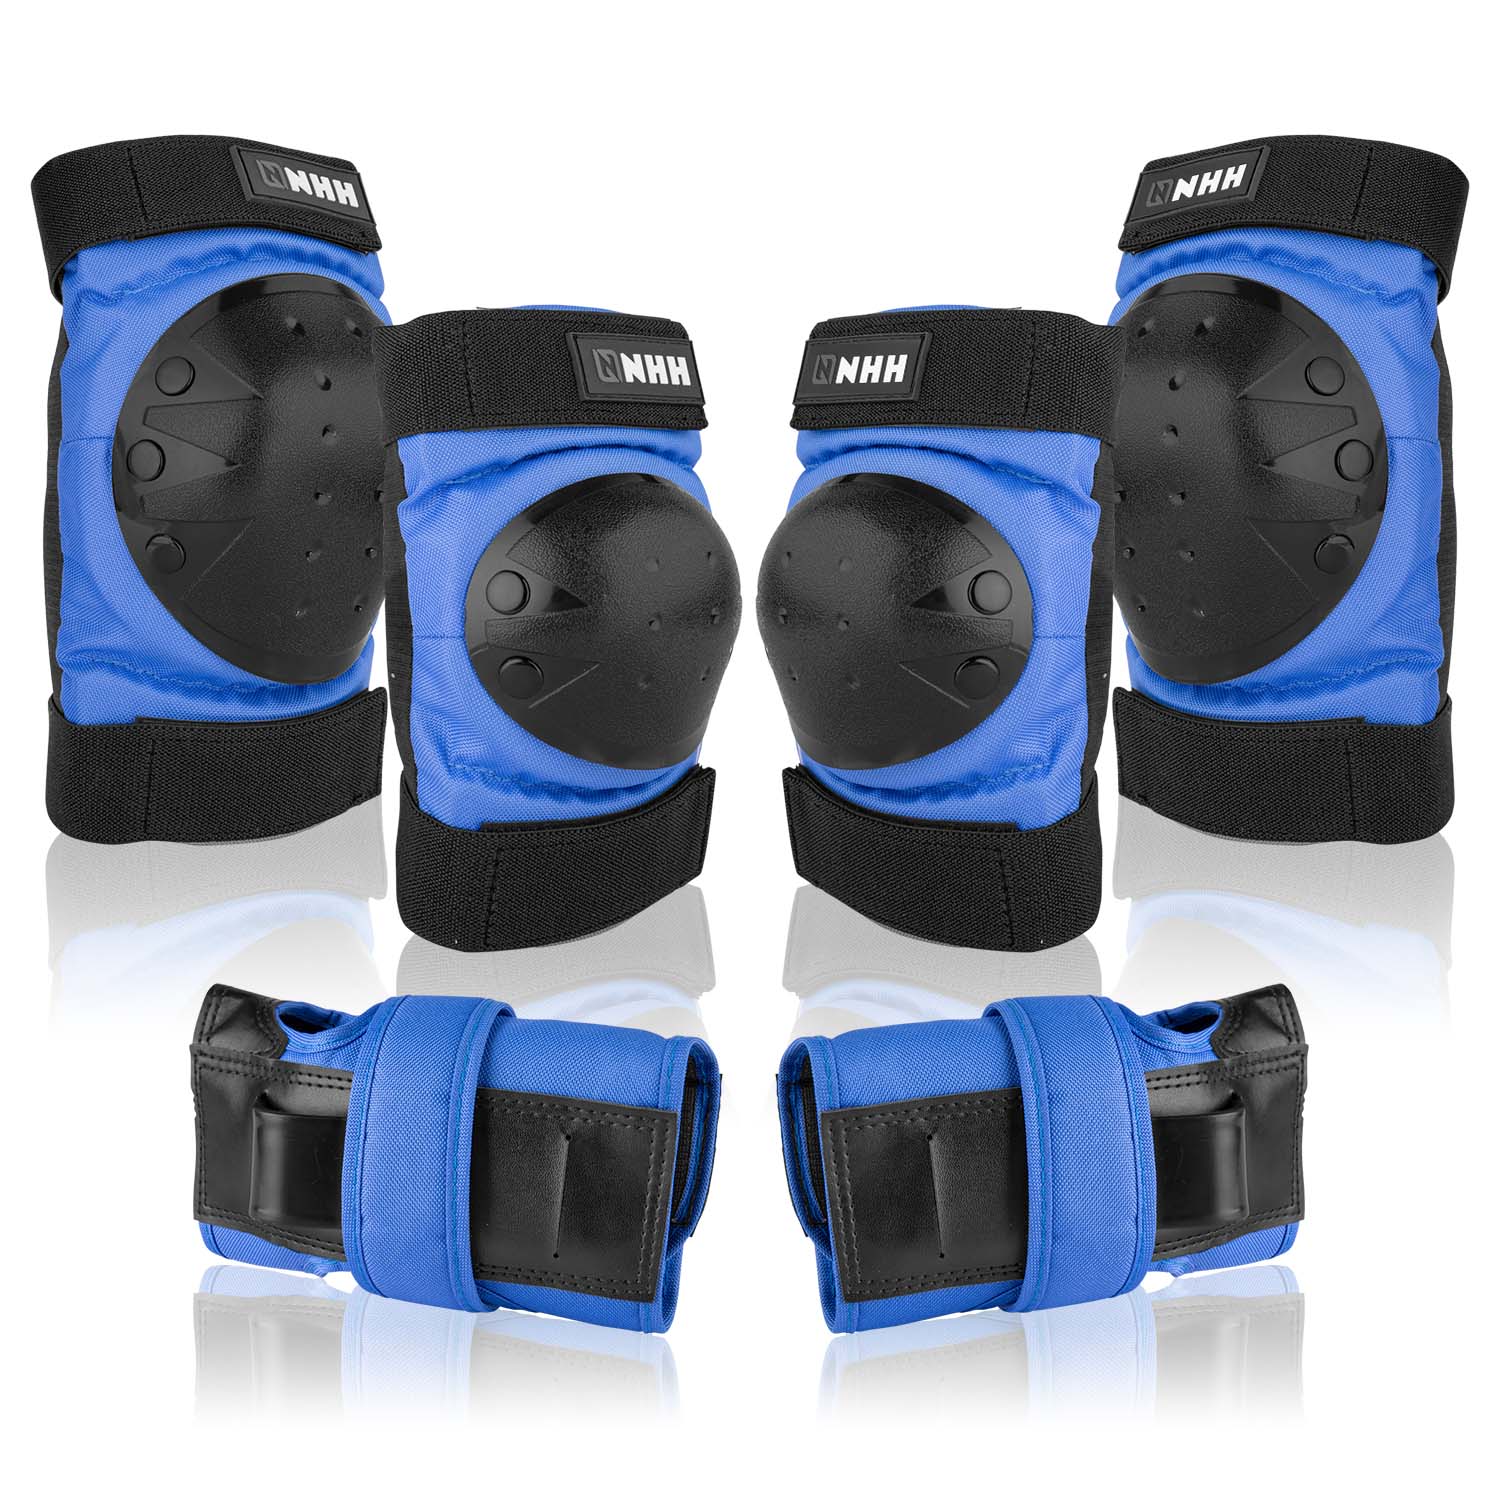 Kids Knee Guard Set, 6 In 1 Kit Protective Gear Knee Guard Elbow